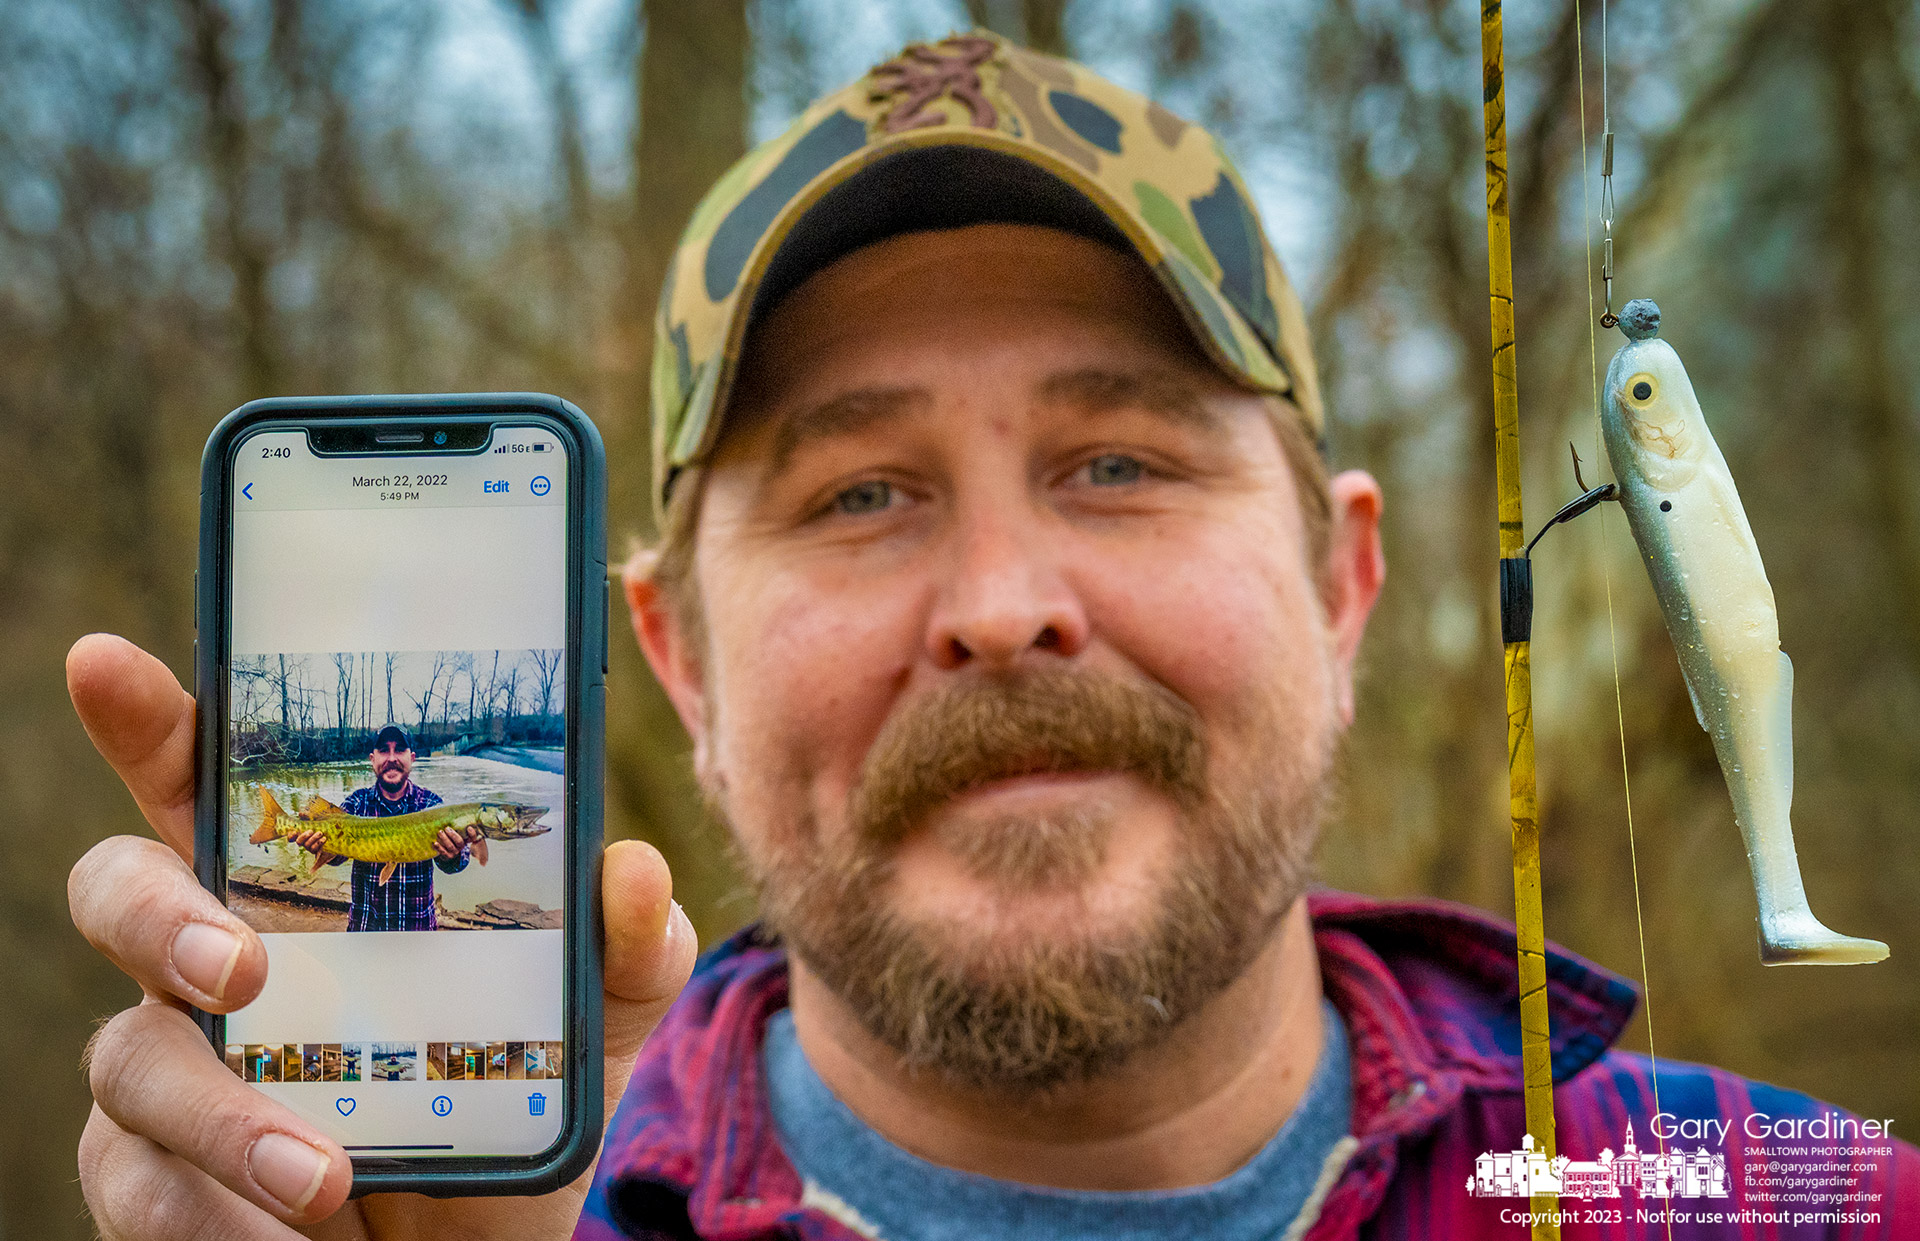 A fisherman proves his success fishing for Muskie below the Alum Creek Park North low-head dam by showing a catch preserved in a photo on his smartphone as he leaves the creek after failing to catch anything Monday. My Final Photo for January 2, 2023.